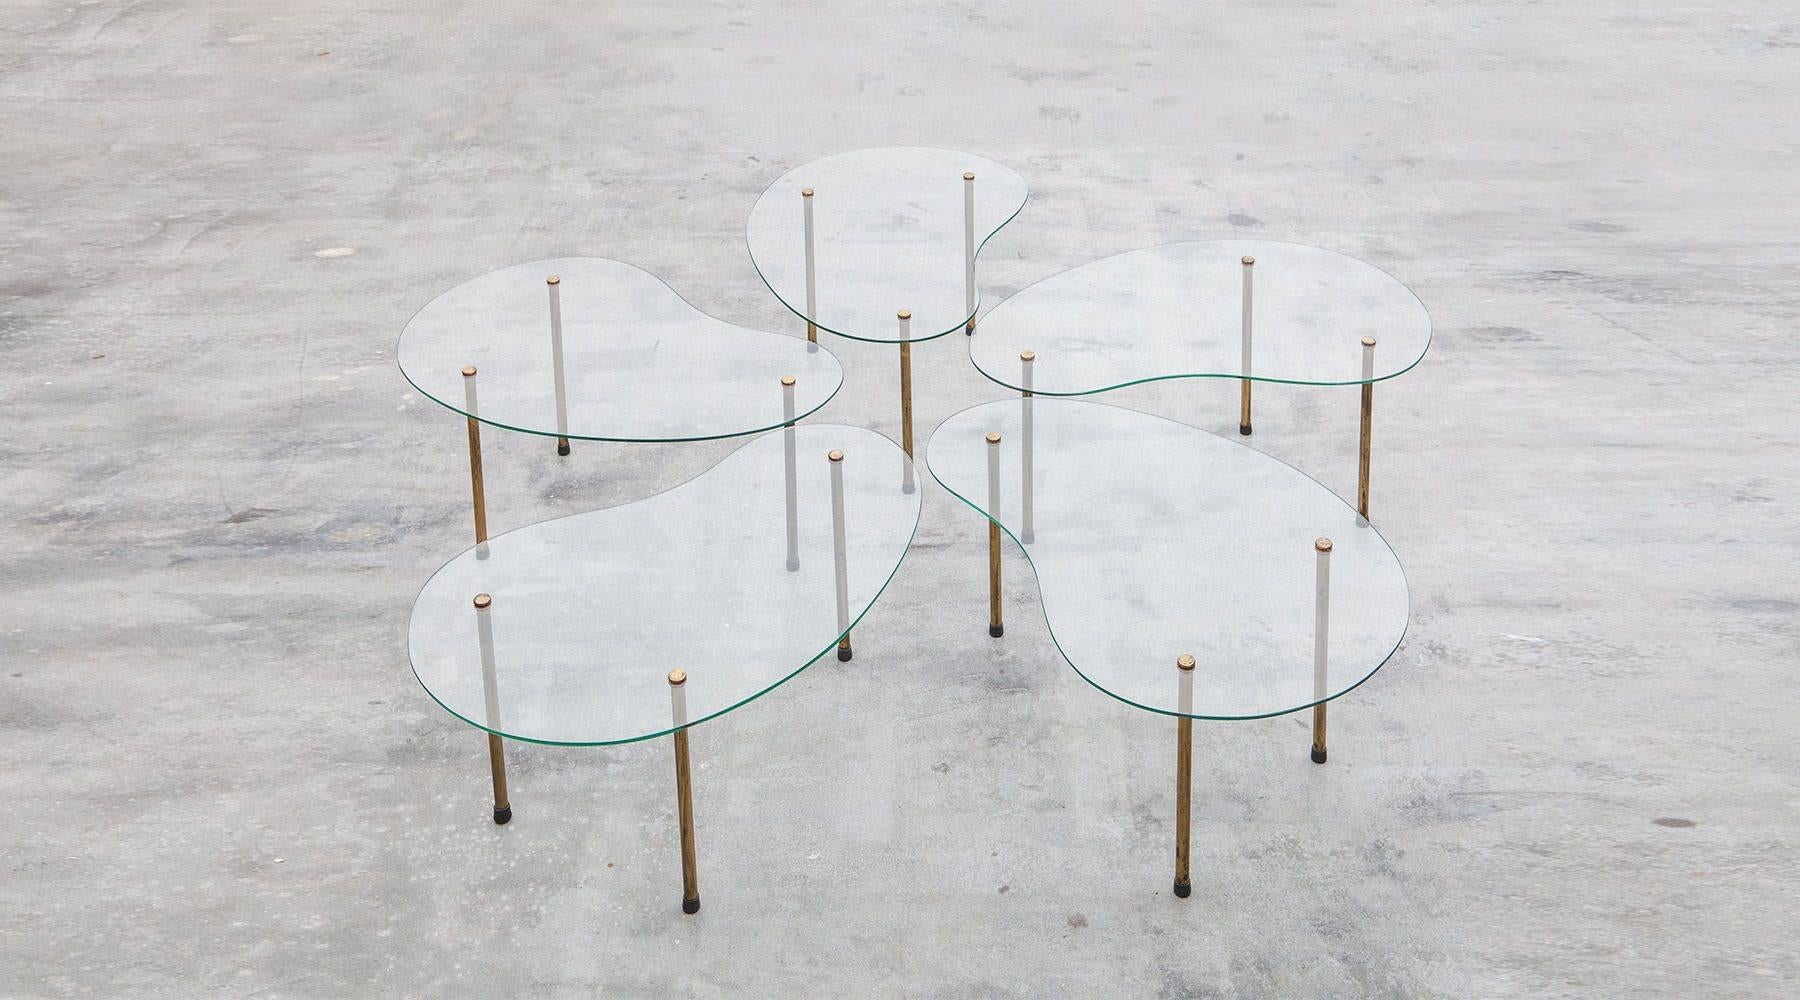 Beautiful set of very functional side tables attributed to the design of Peter Hvidt. Five identical tables, each with a crescent shape in glass and three brass legs, can be configured to almost any form you like. The brass legs have their original